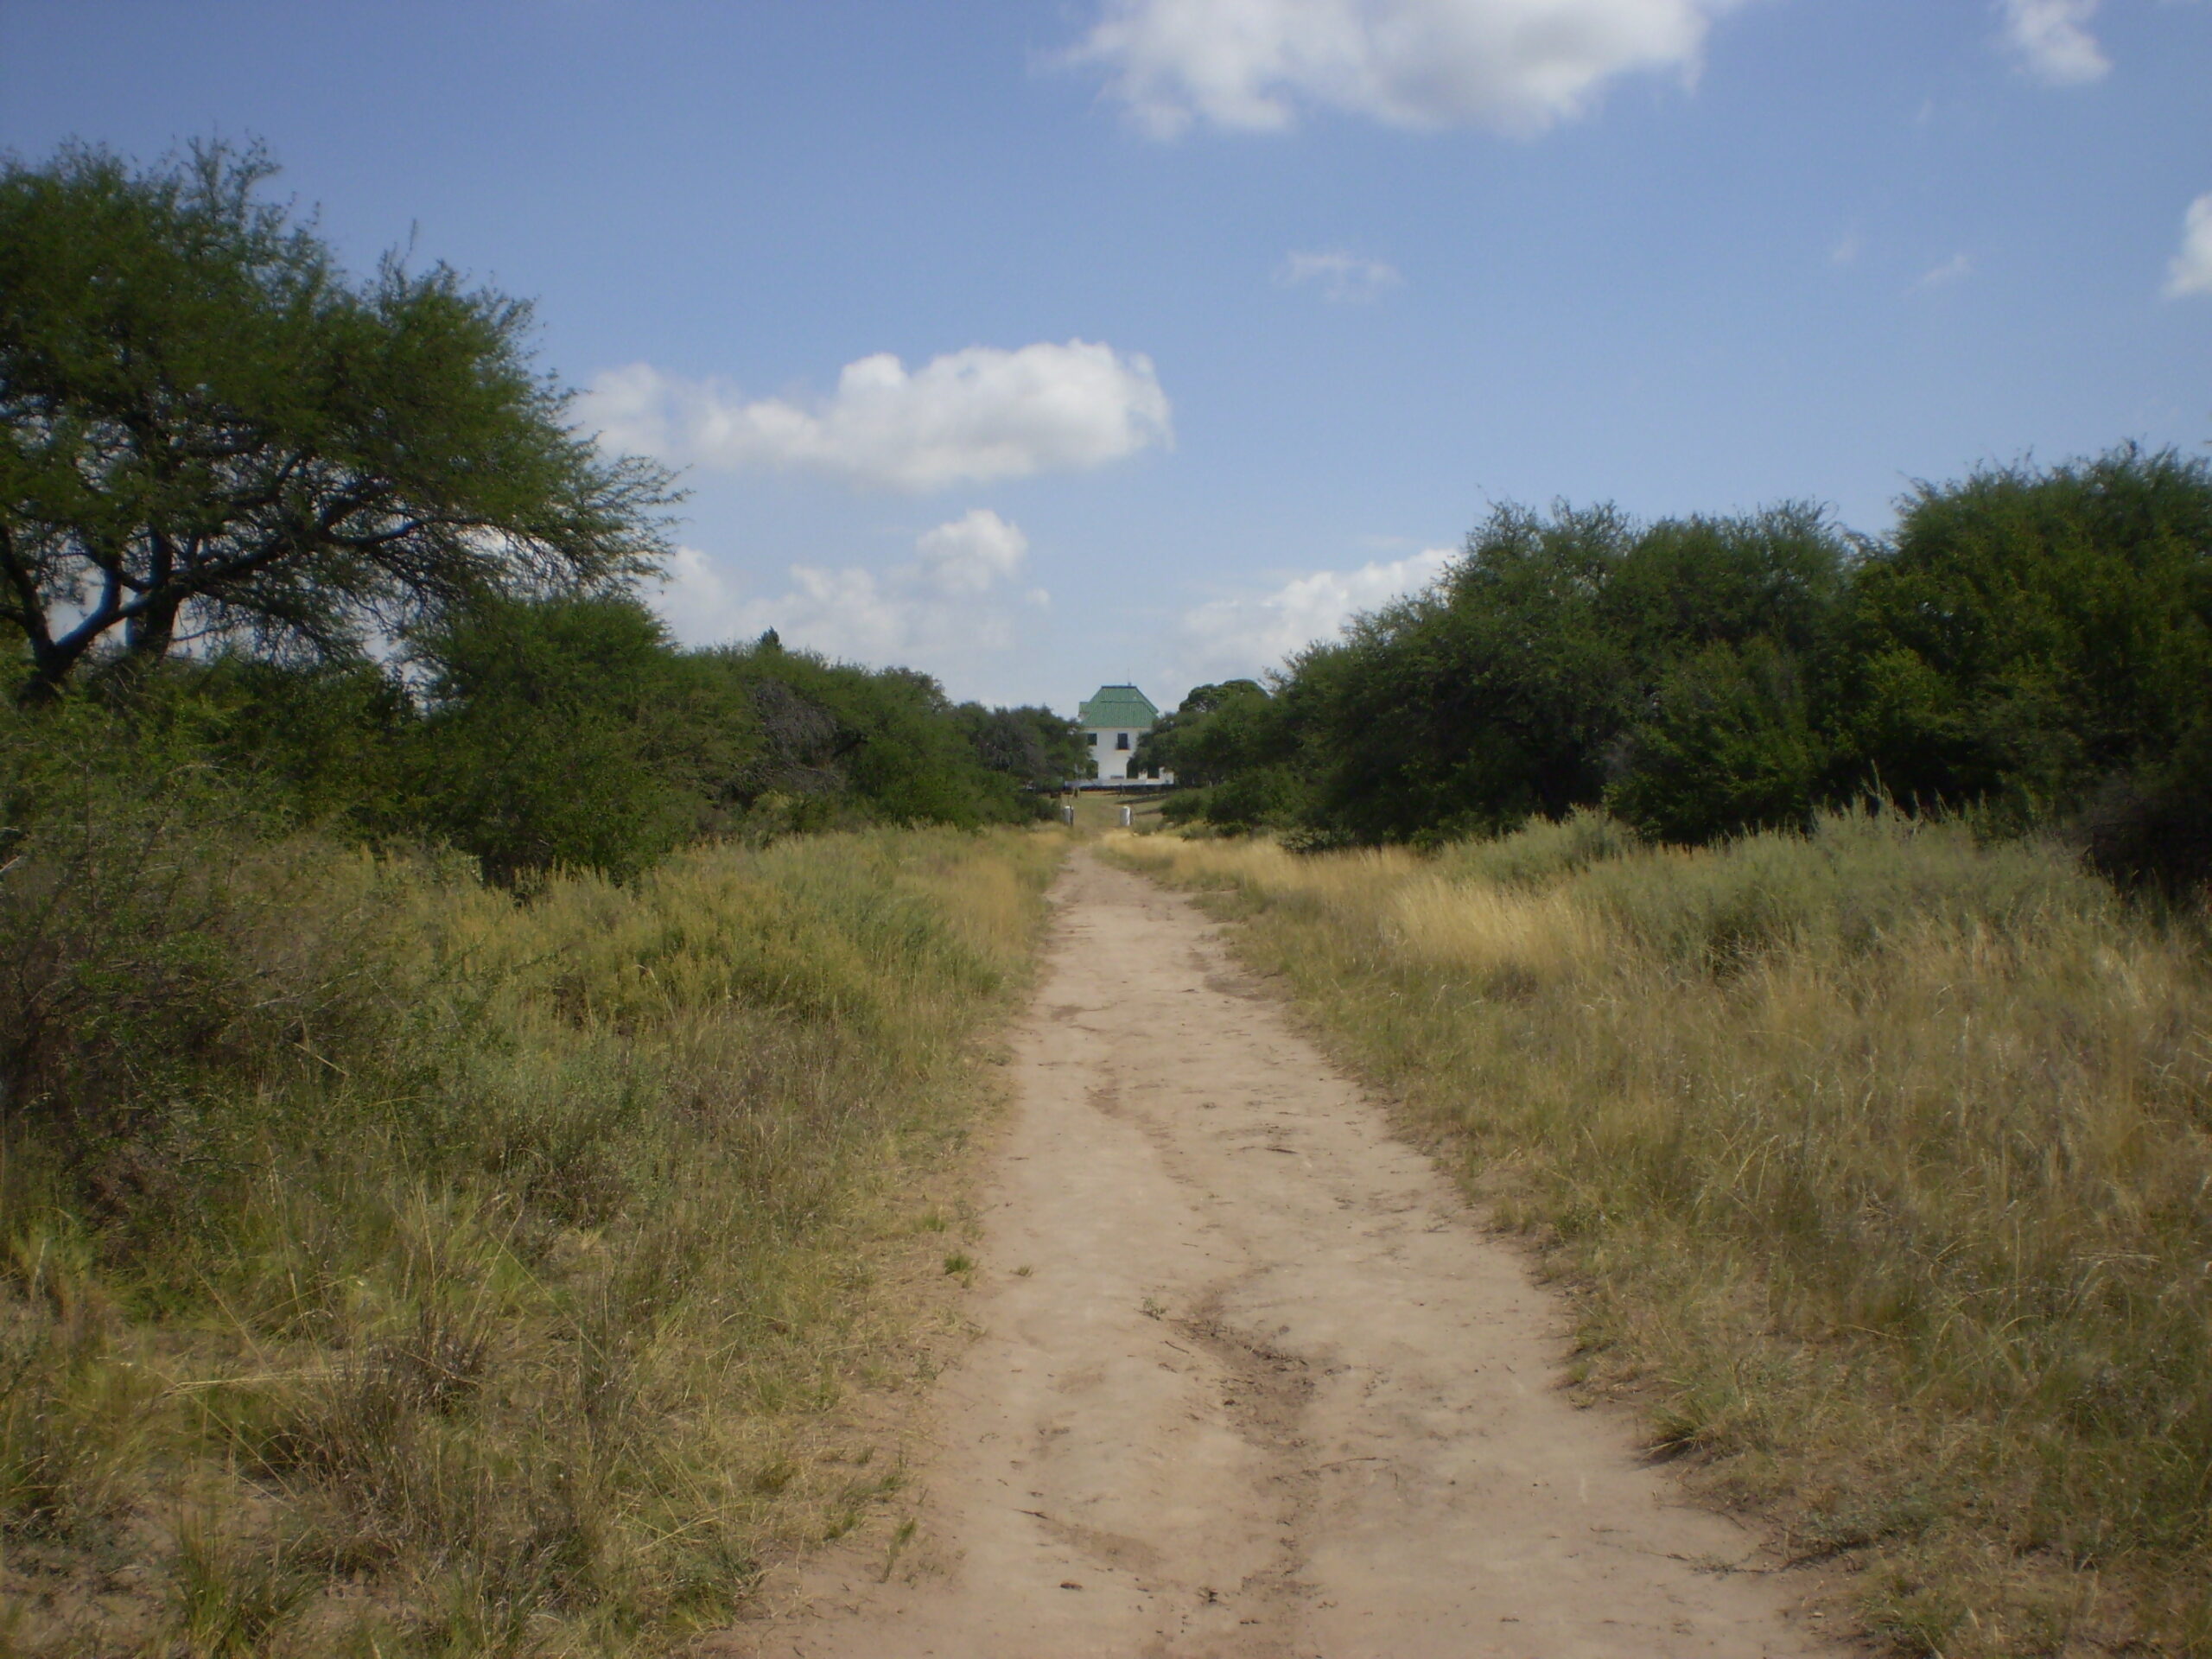 Photograph of pampas in La Pampa, Argentina. The photo shows a sandy trail cutting straight through the near-center of the image from front to horizon. Grasses are growing on either side of the trail, with trees flanking the grasses. A white building with a green roof can be seen at the end of the trail.